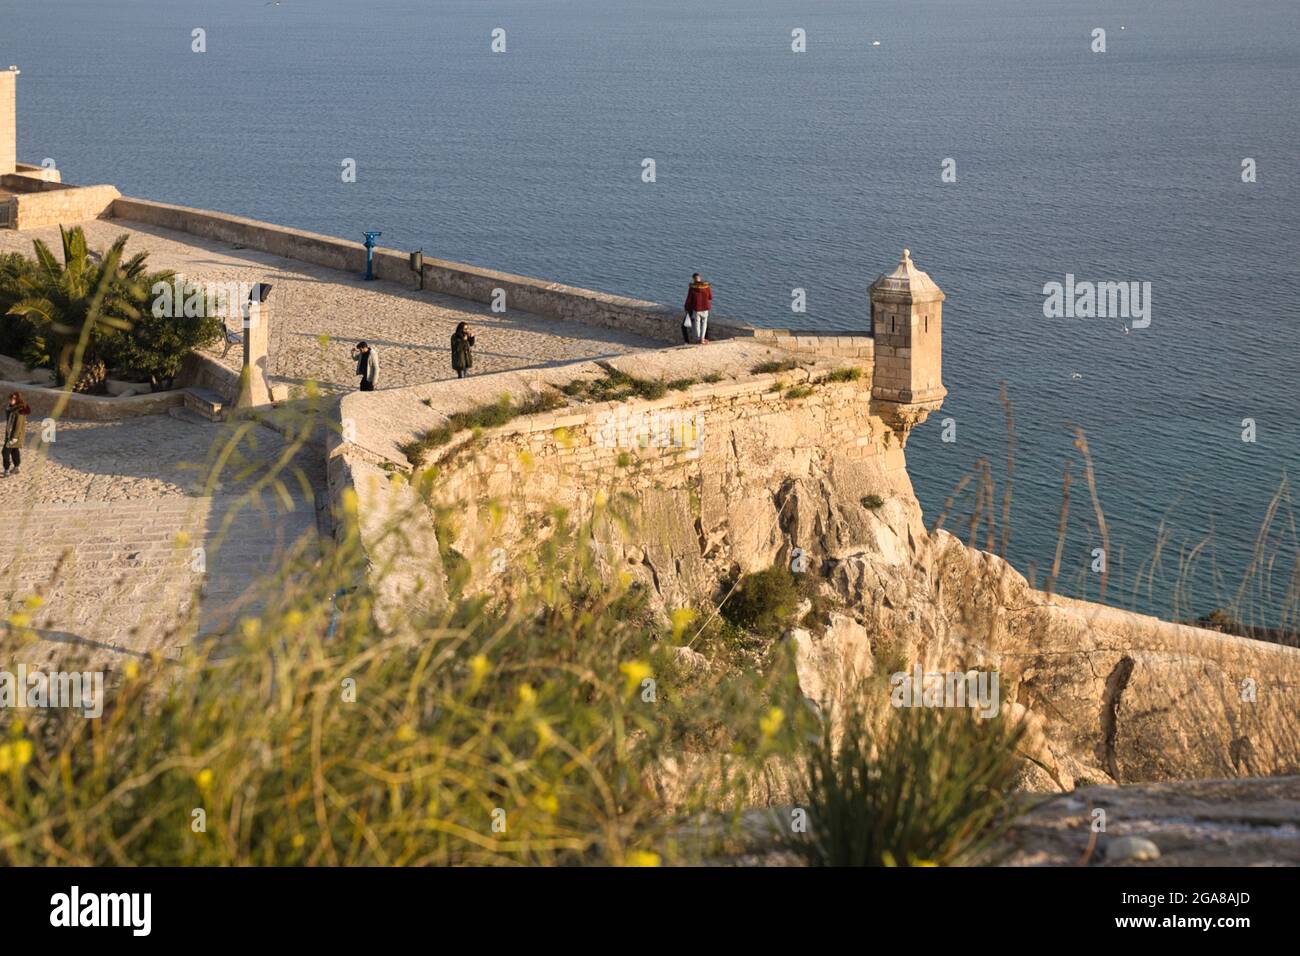 A view across the top of the castle walls of Santa Barbara castle with the Mediterranean Sea beyond, at Alicante, Spain. People sight seeing Stock Photo